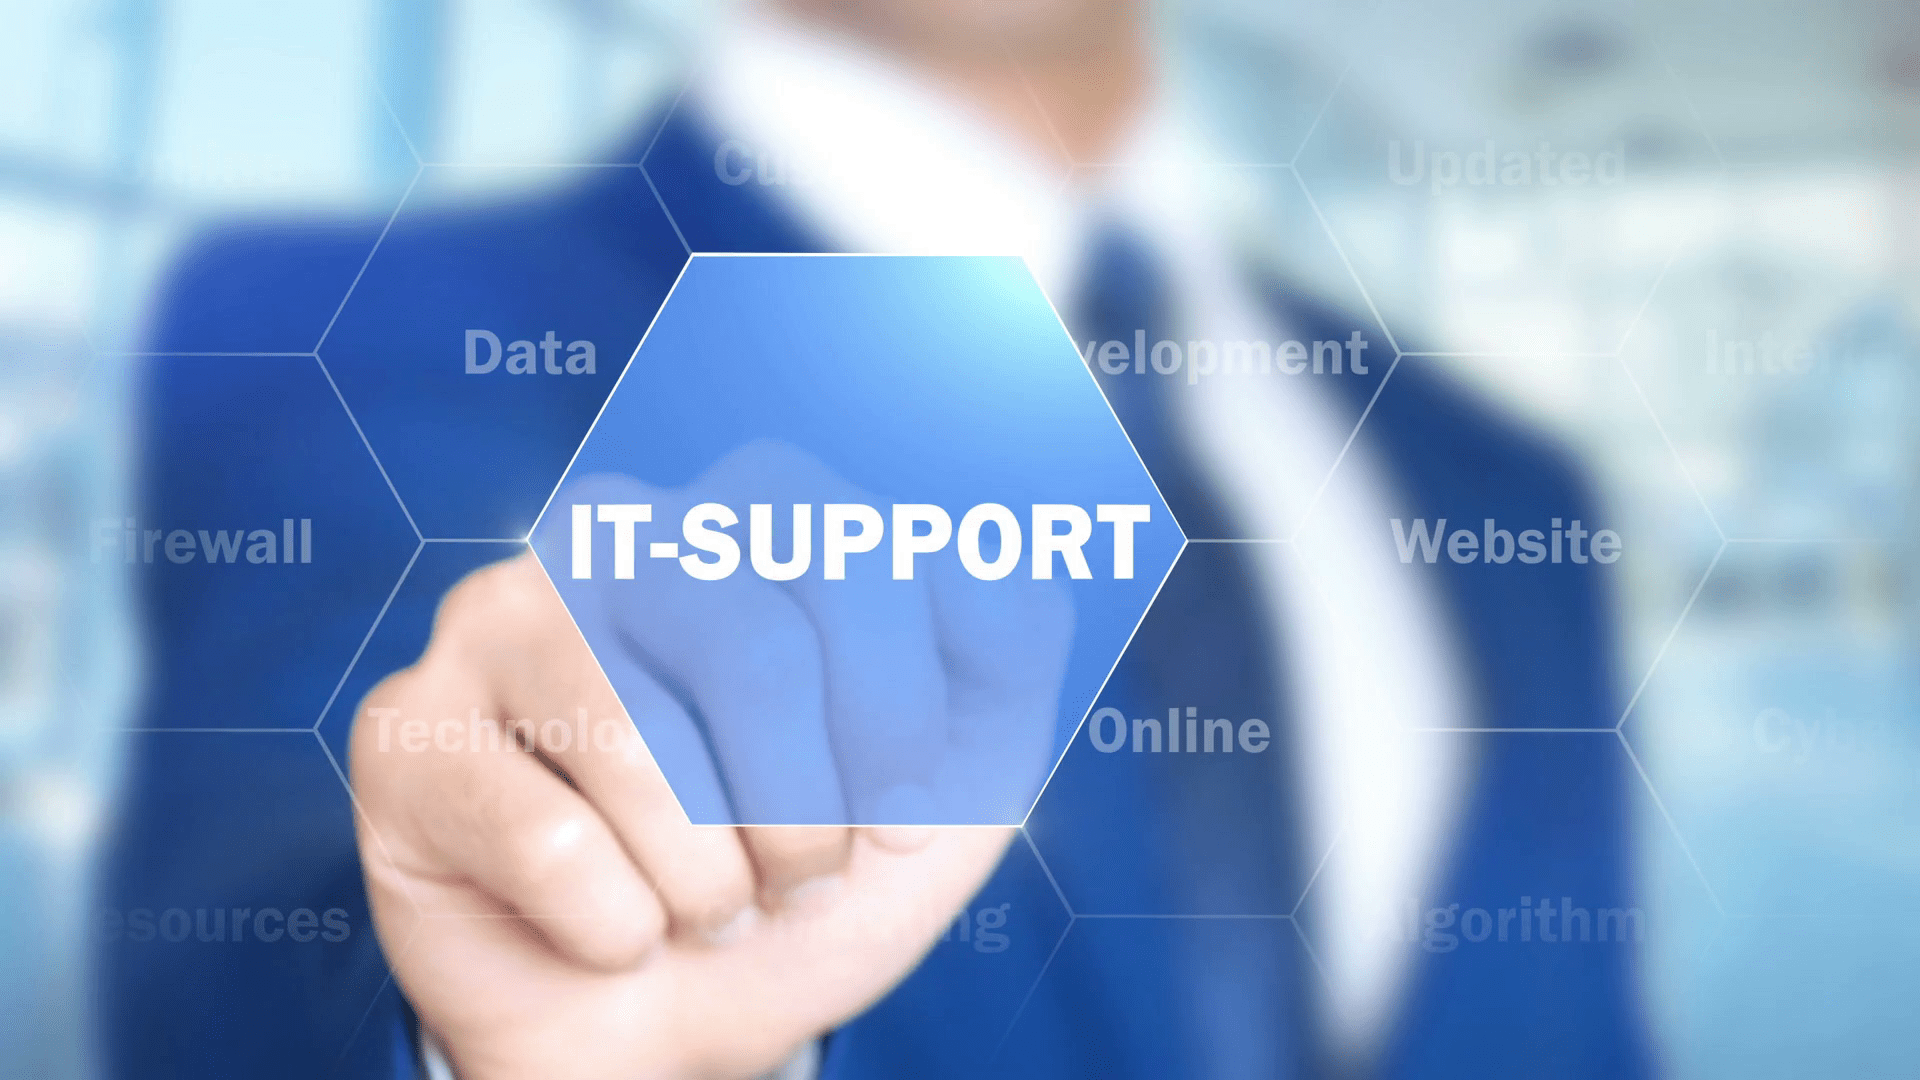 It Support Companies In Essex